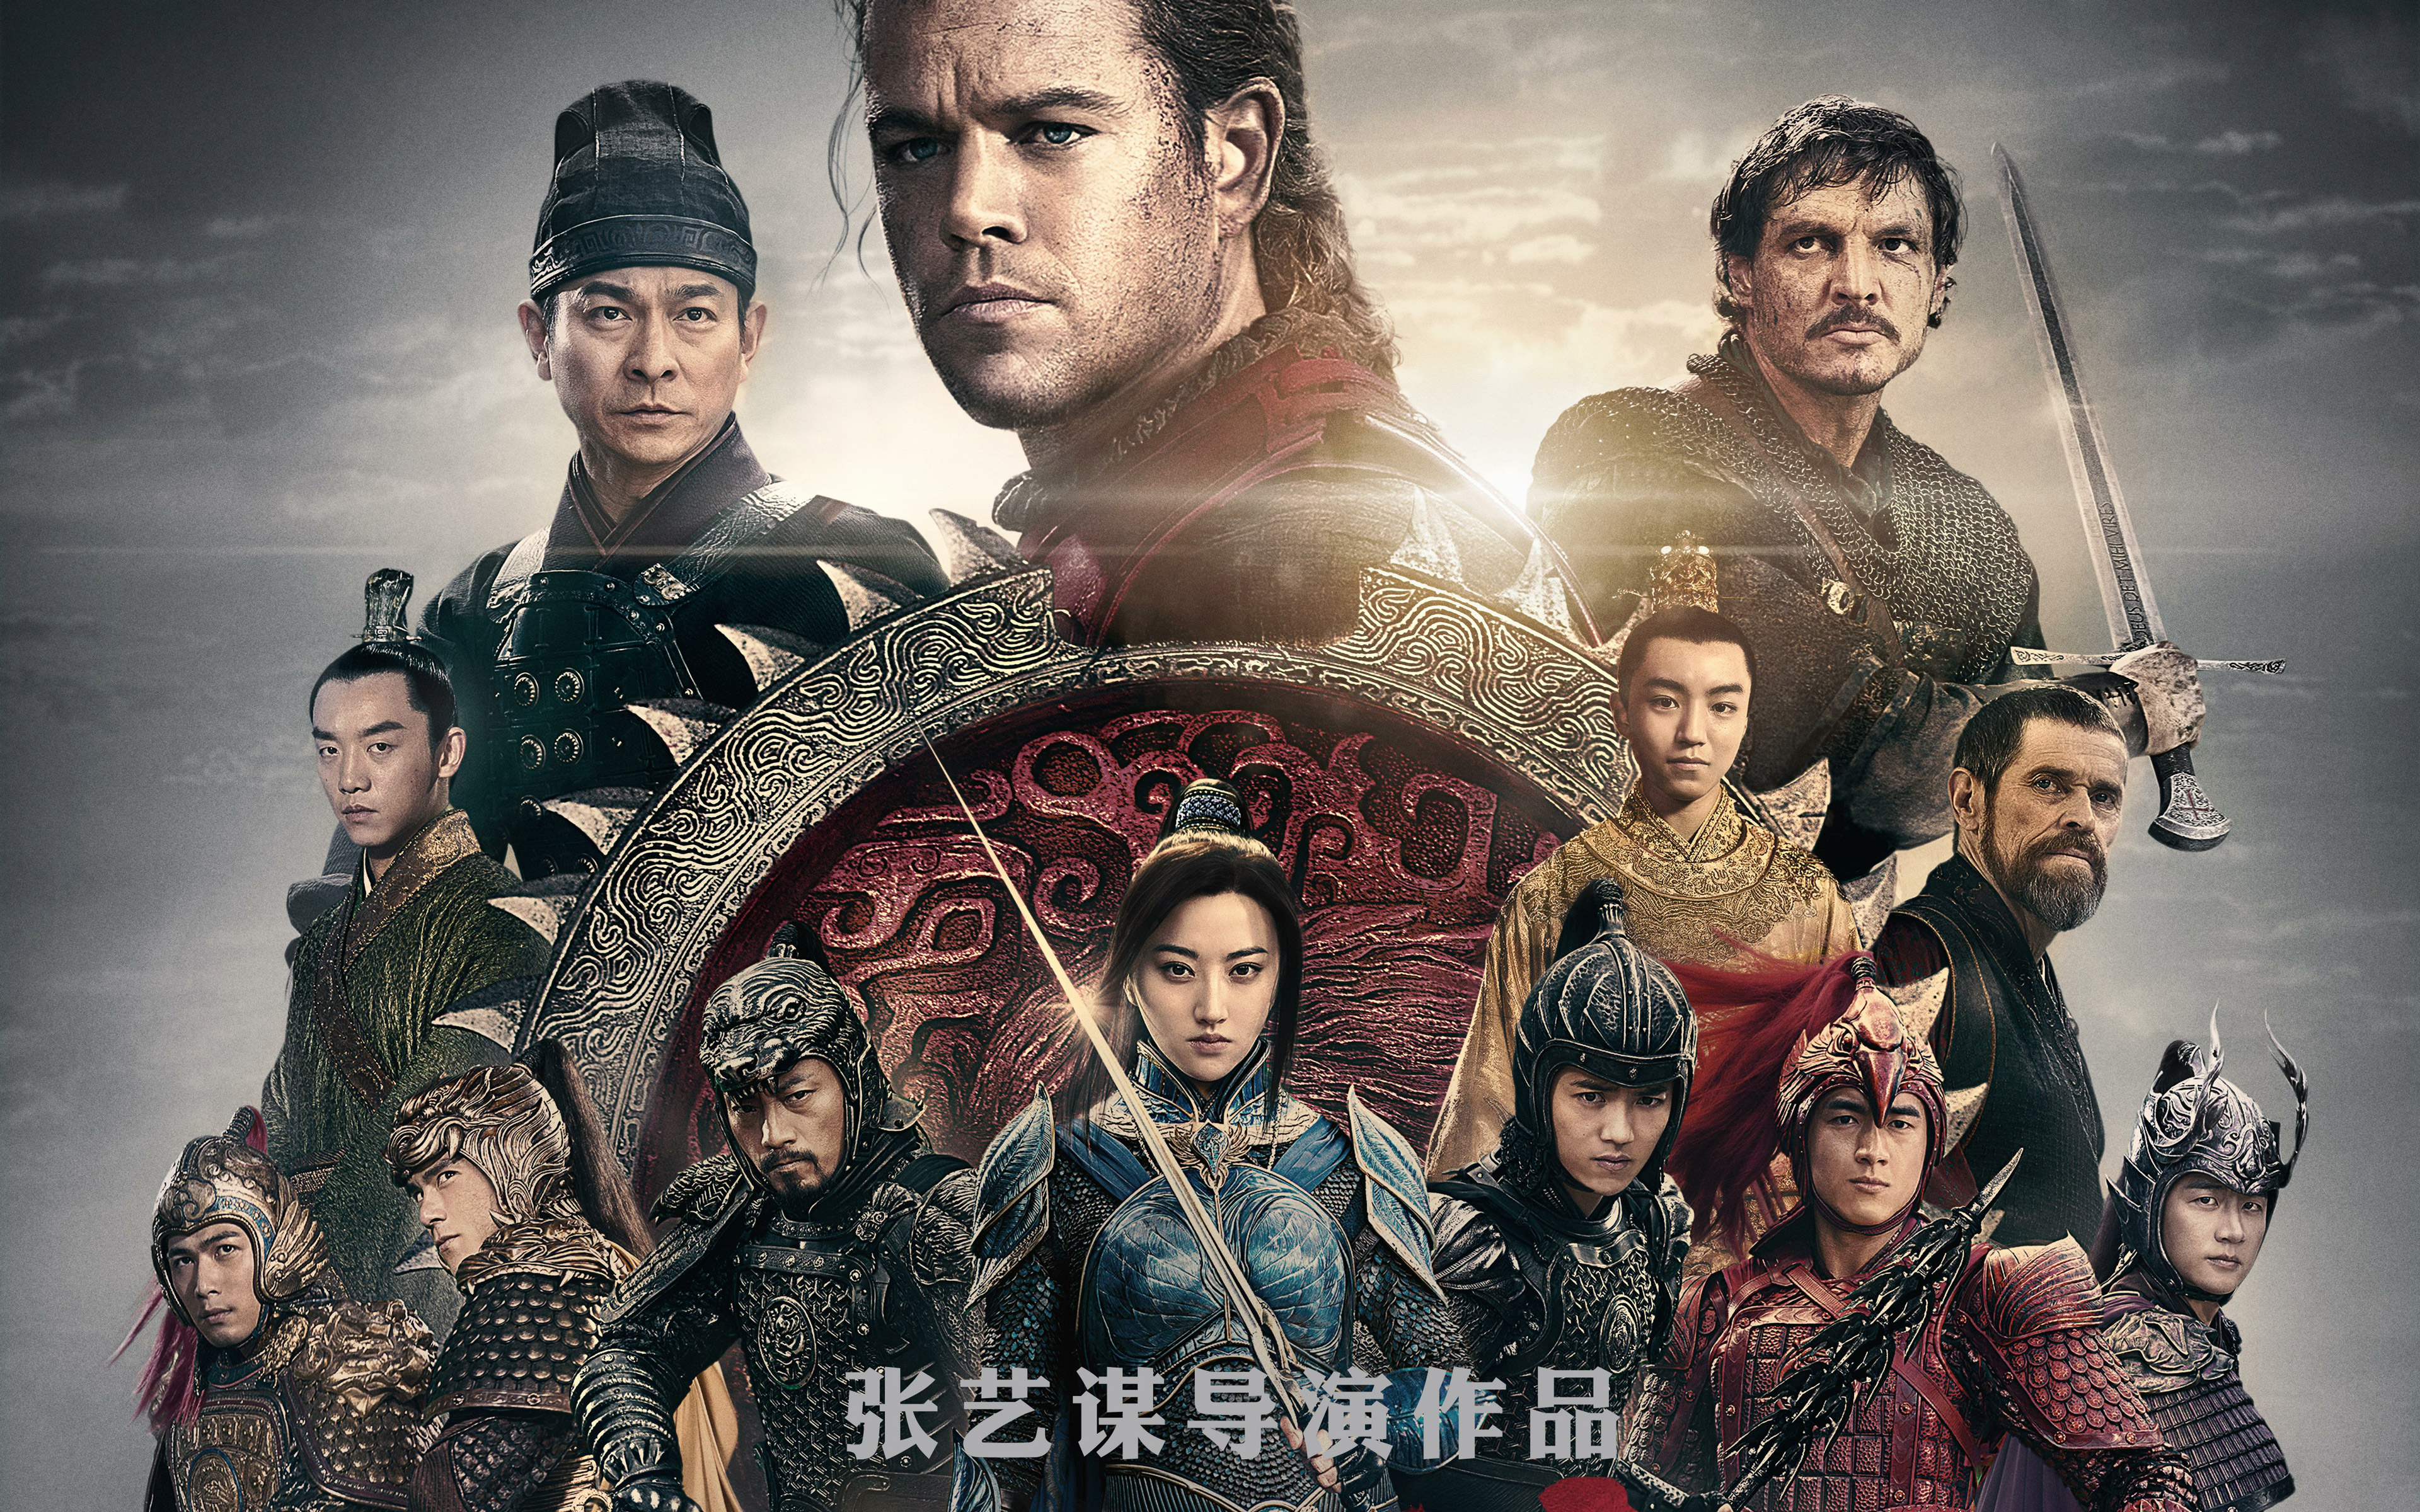 http://hdqwalls.com/wallpapers/the-great-wall-2016-movie-sd.jpg